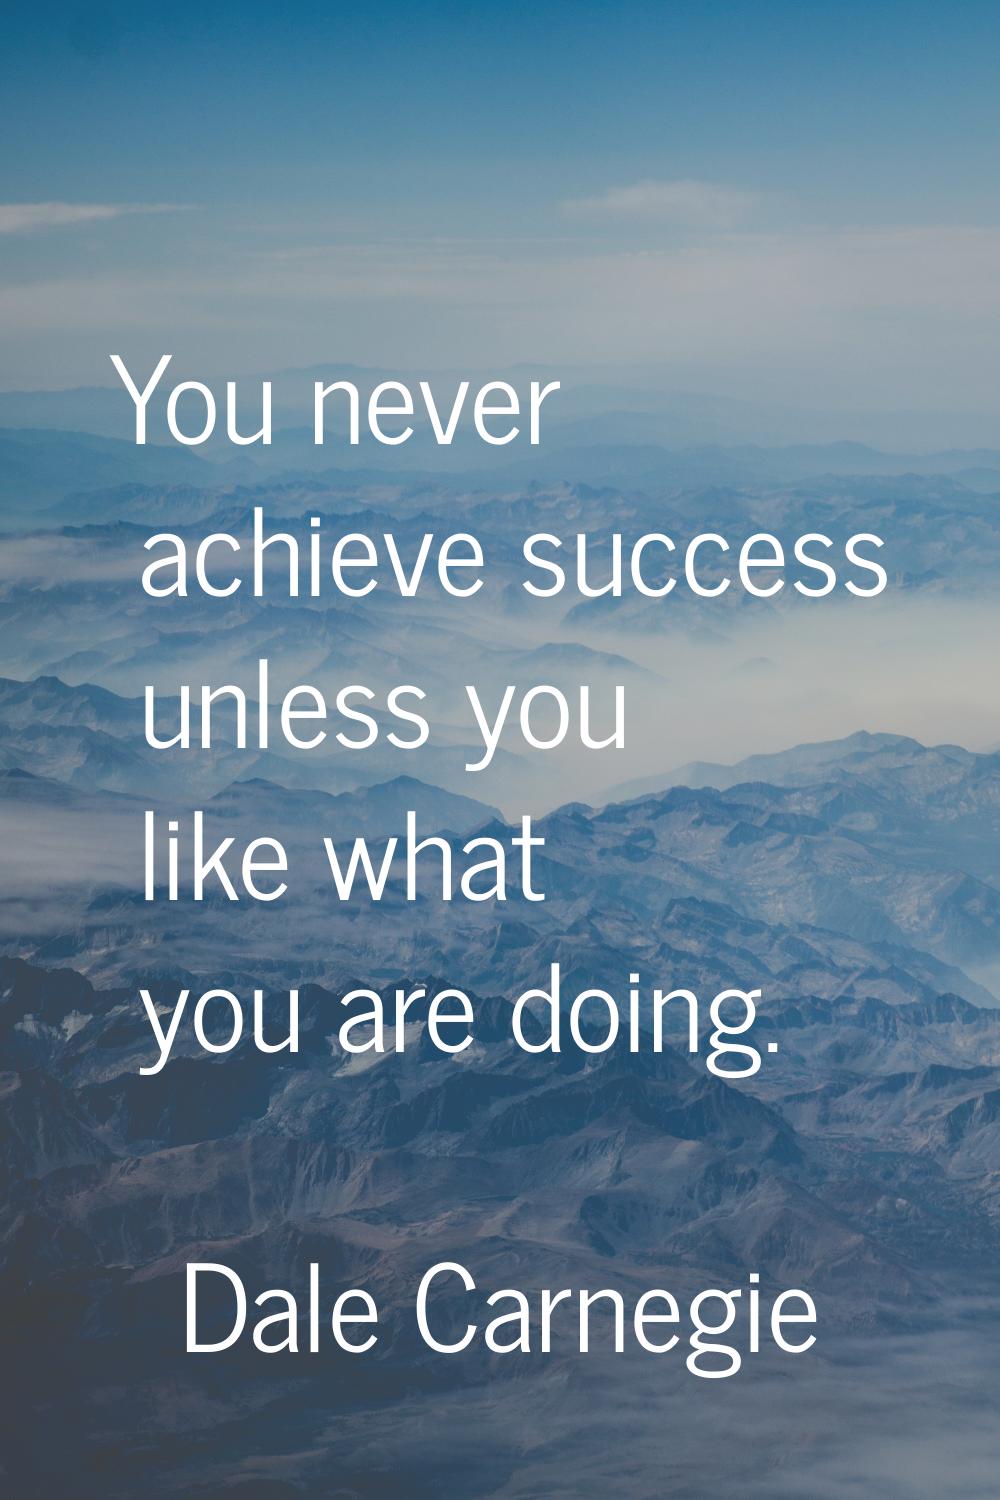 You never achieve success unless you like what you are doing.